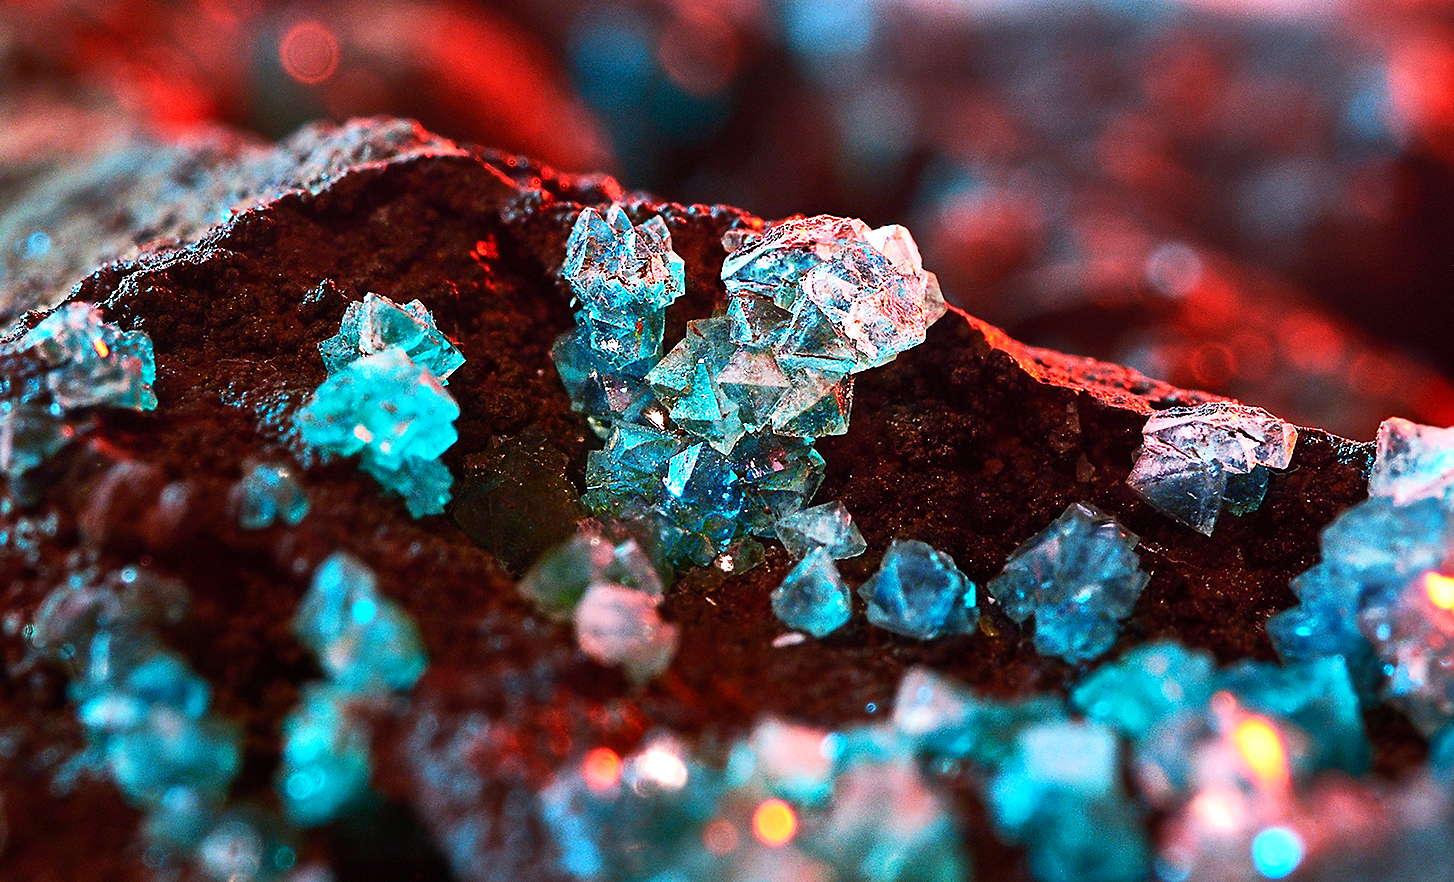 Screenshot showing red, turquoise and clear crystals